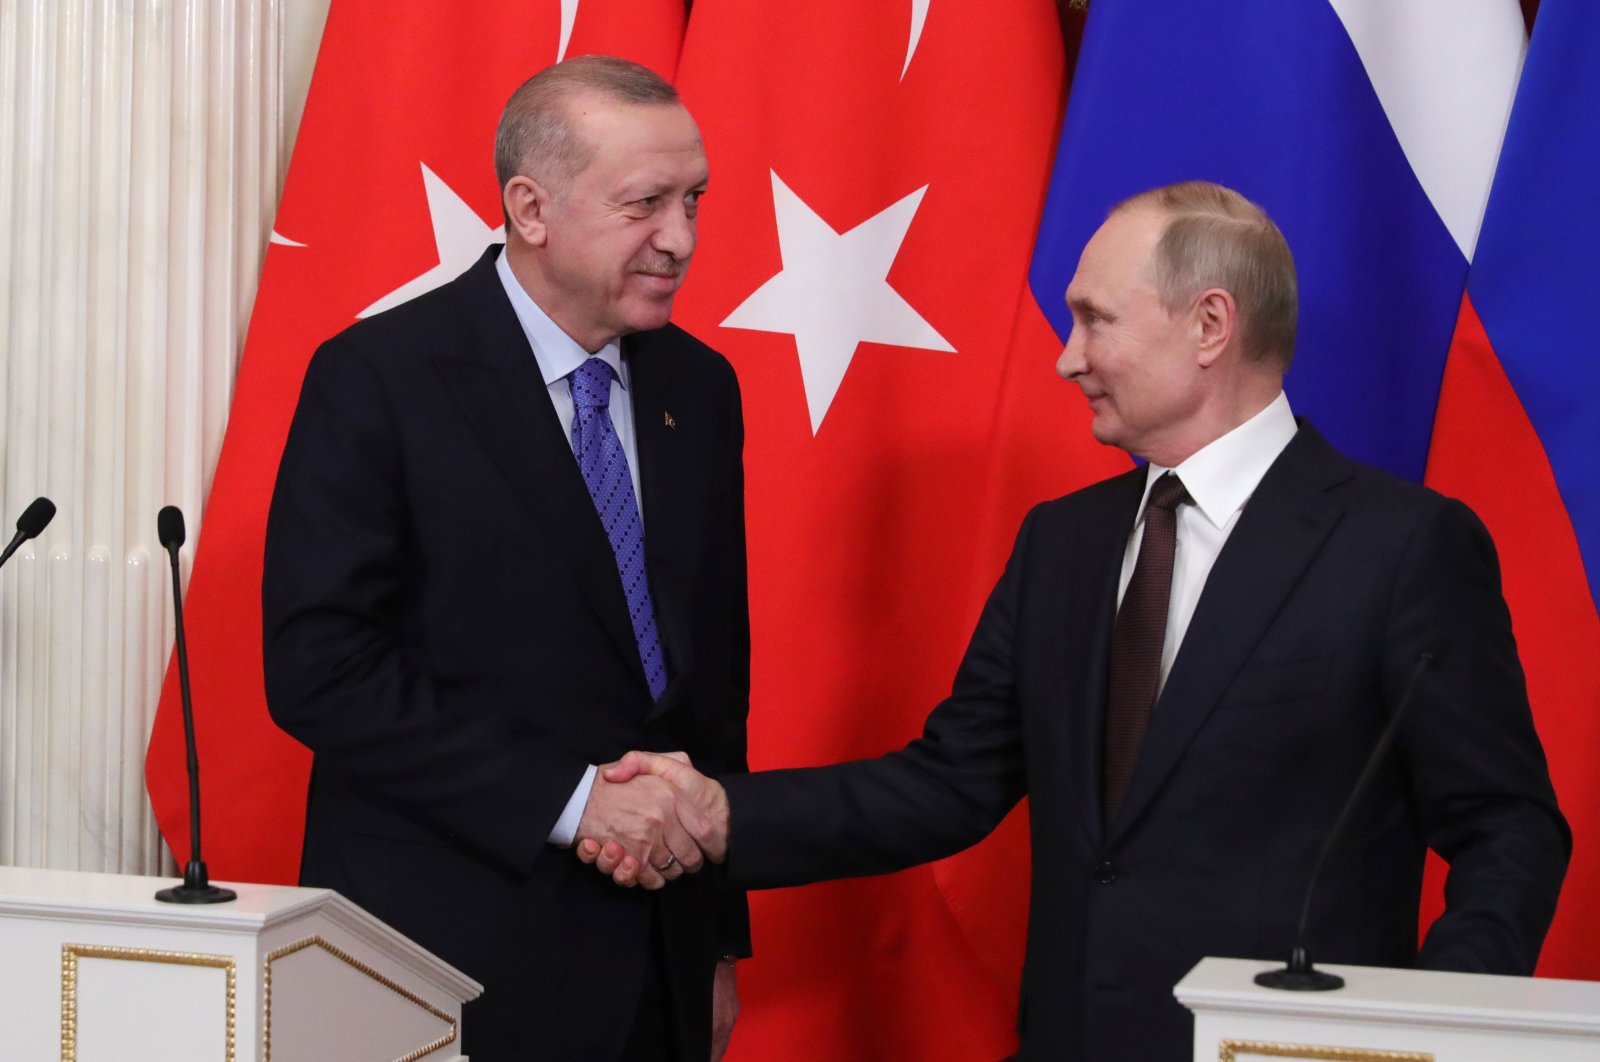  President Recep Tayyip Erdoğan (L) and Russian President Vladimir Putin (R) shake hands during a joint news conference following their talks in the Kremlin in Moscow, Russia, March 5, 2020. (EPA File Photo)